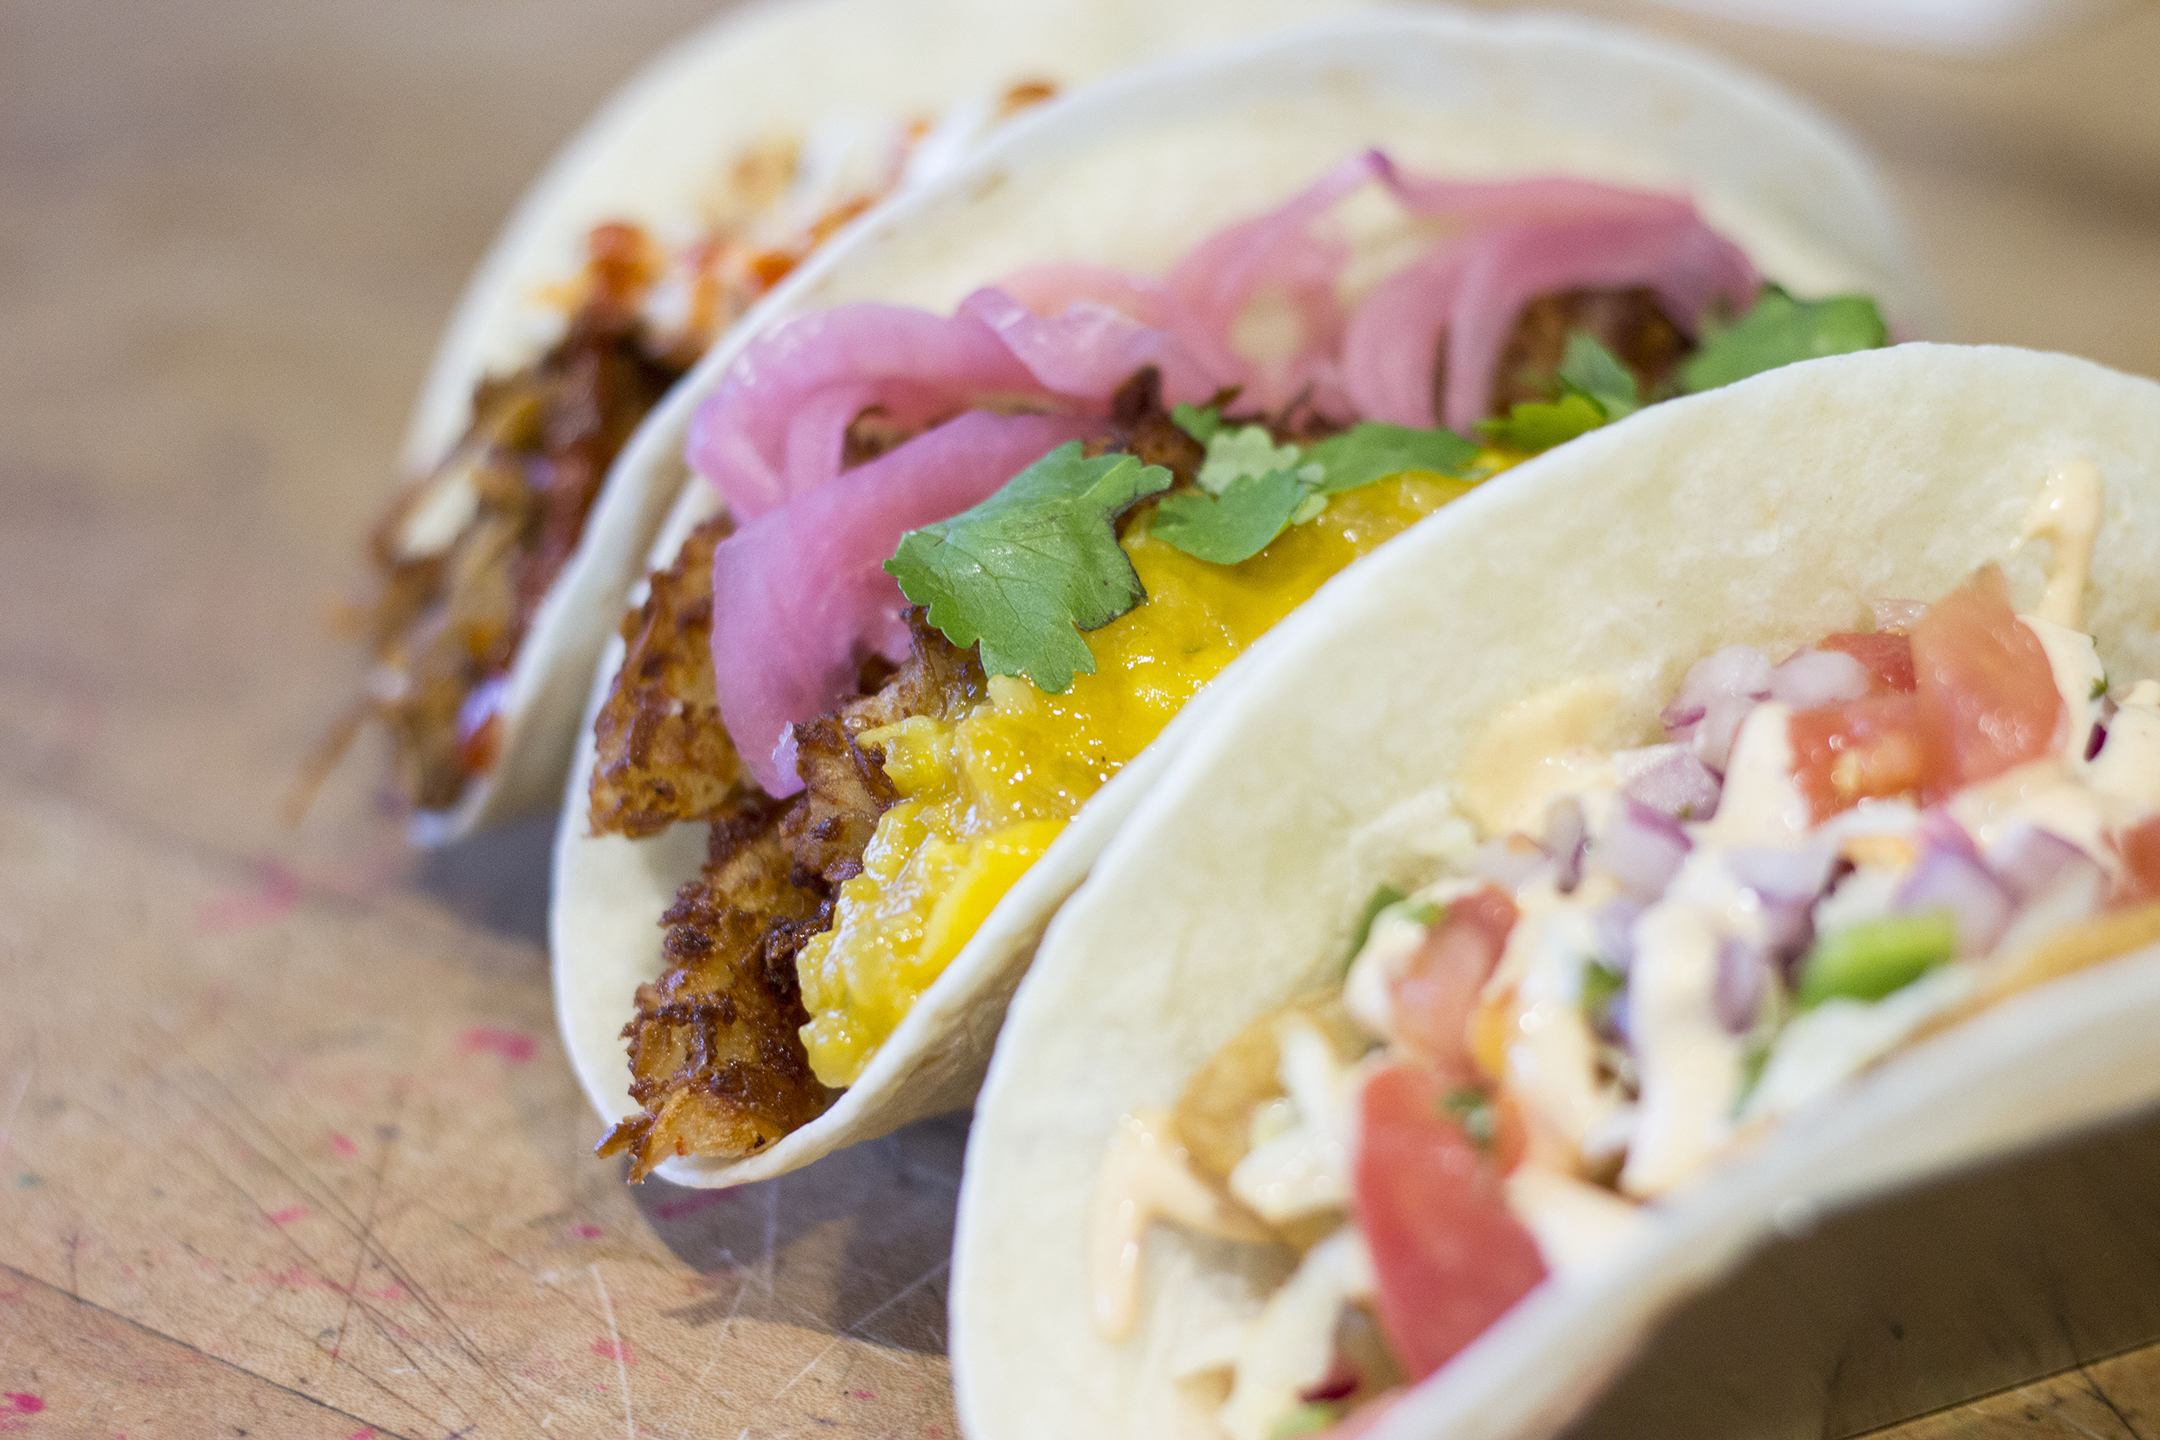 Tacos from Walkerville Eatery in Windsor, Ontario.